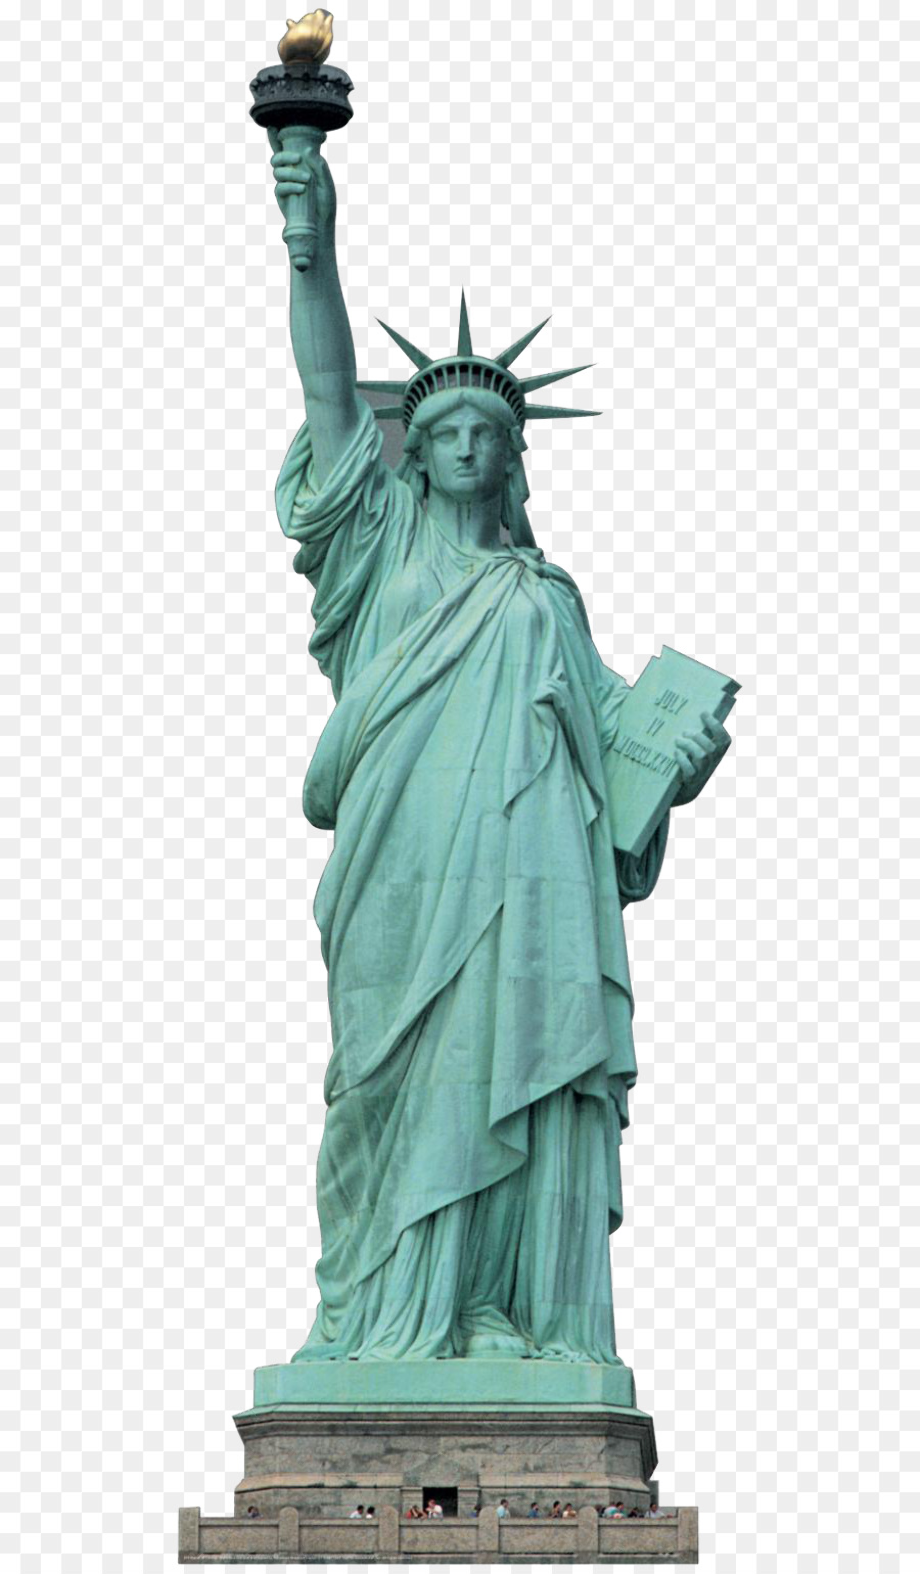 Download High Quality statue of liberty clipart graphic Transparent PNG